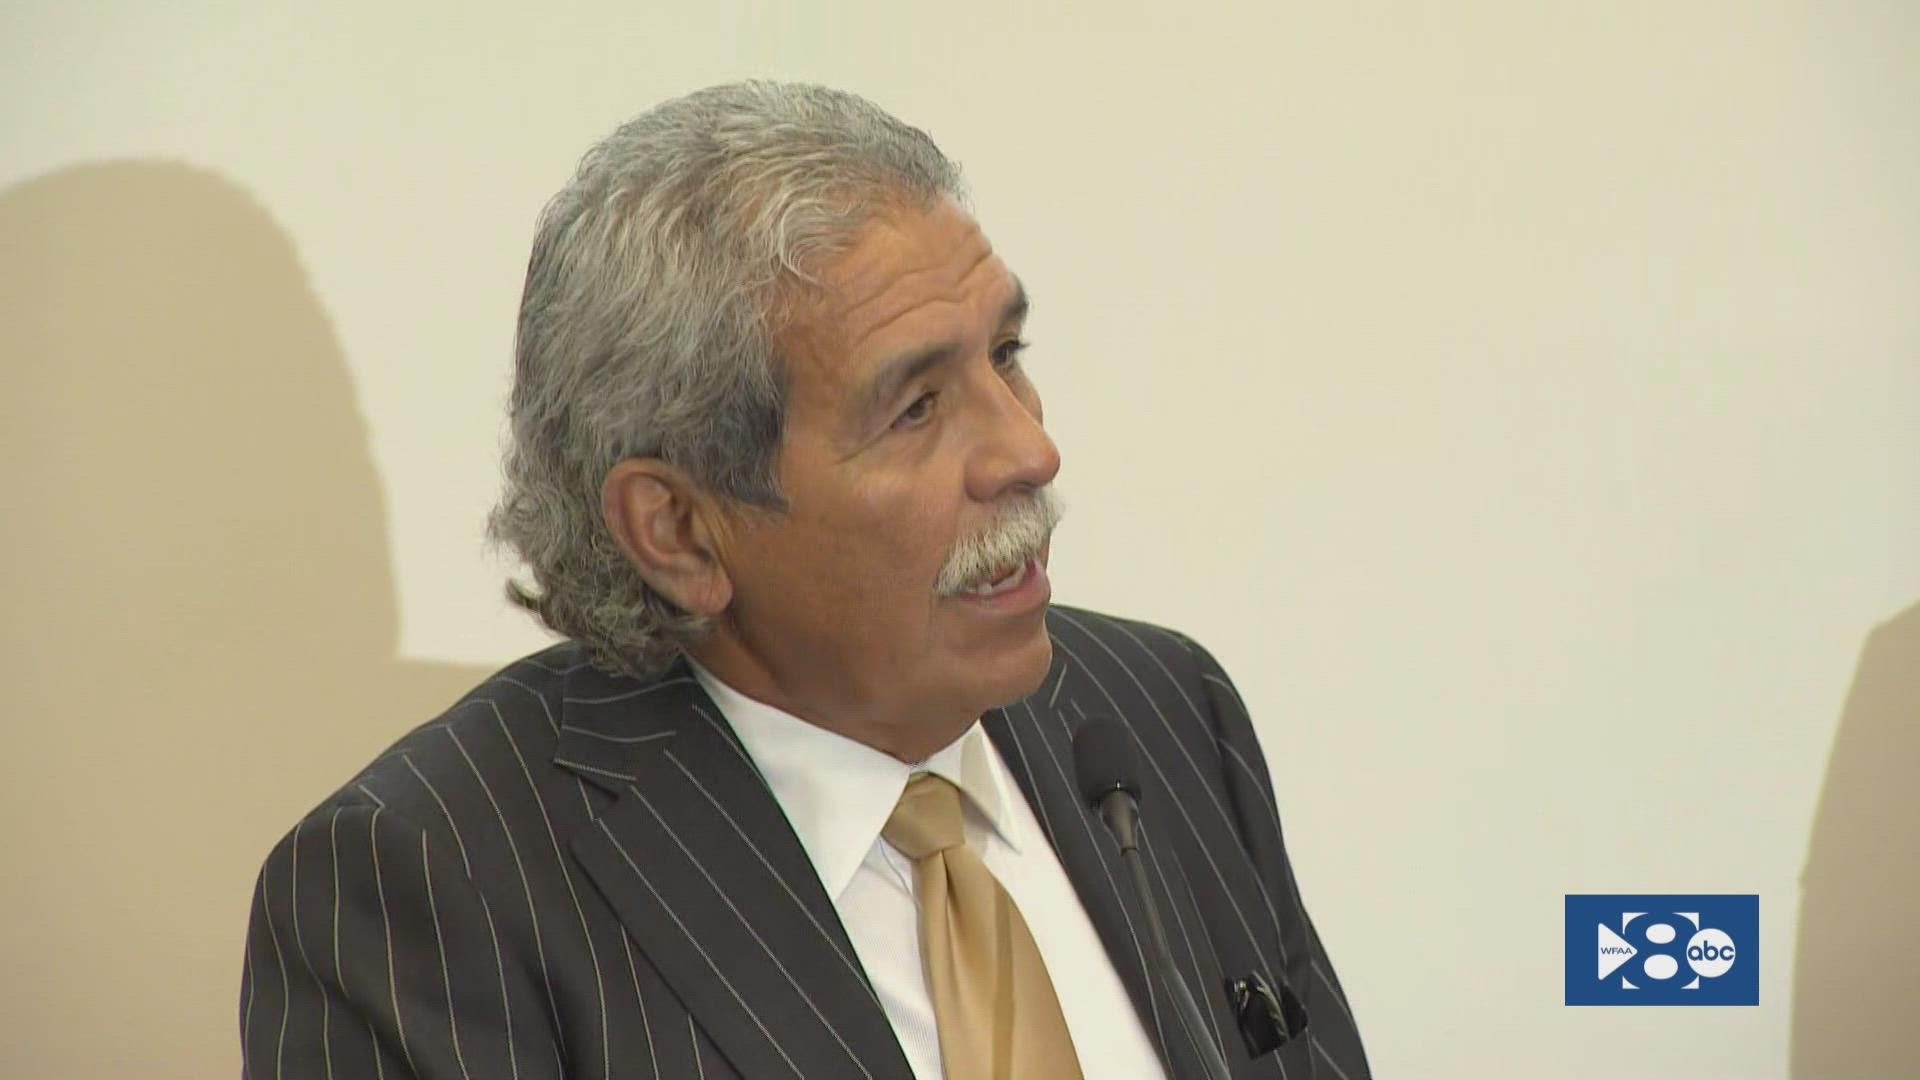 Dr. Hinojosa says he's not stepping down from the superintendent job, he's stepping up to something else.